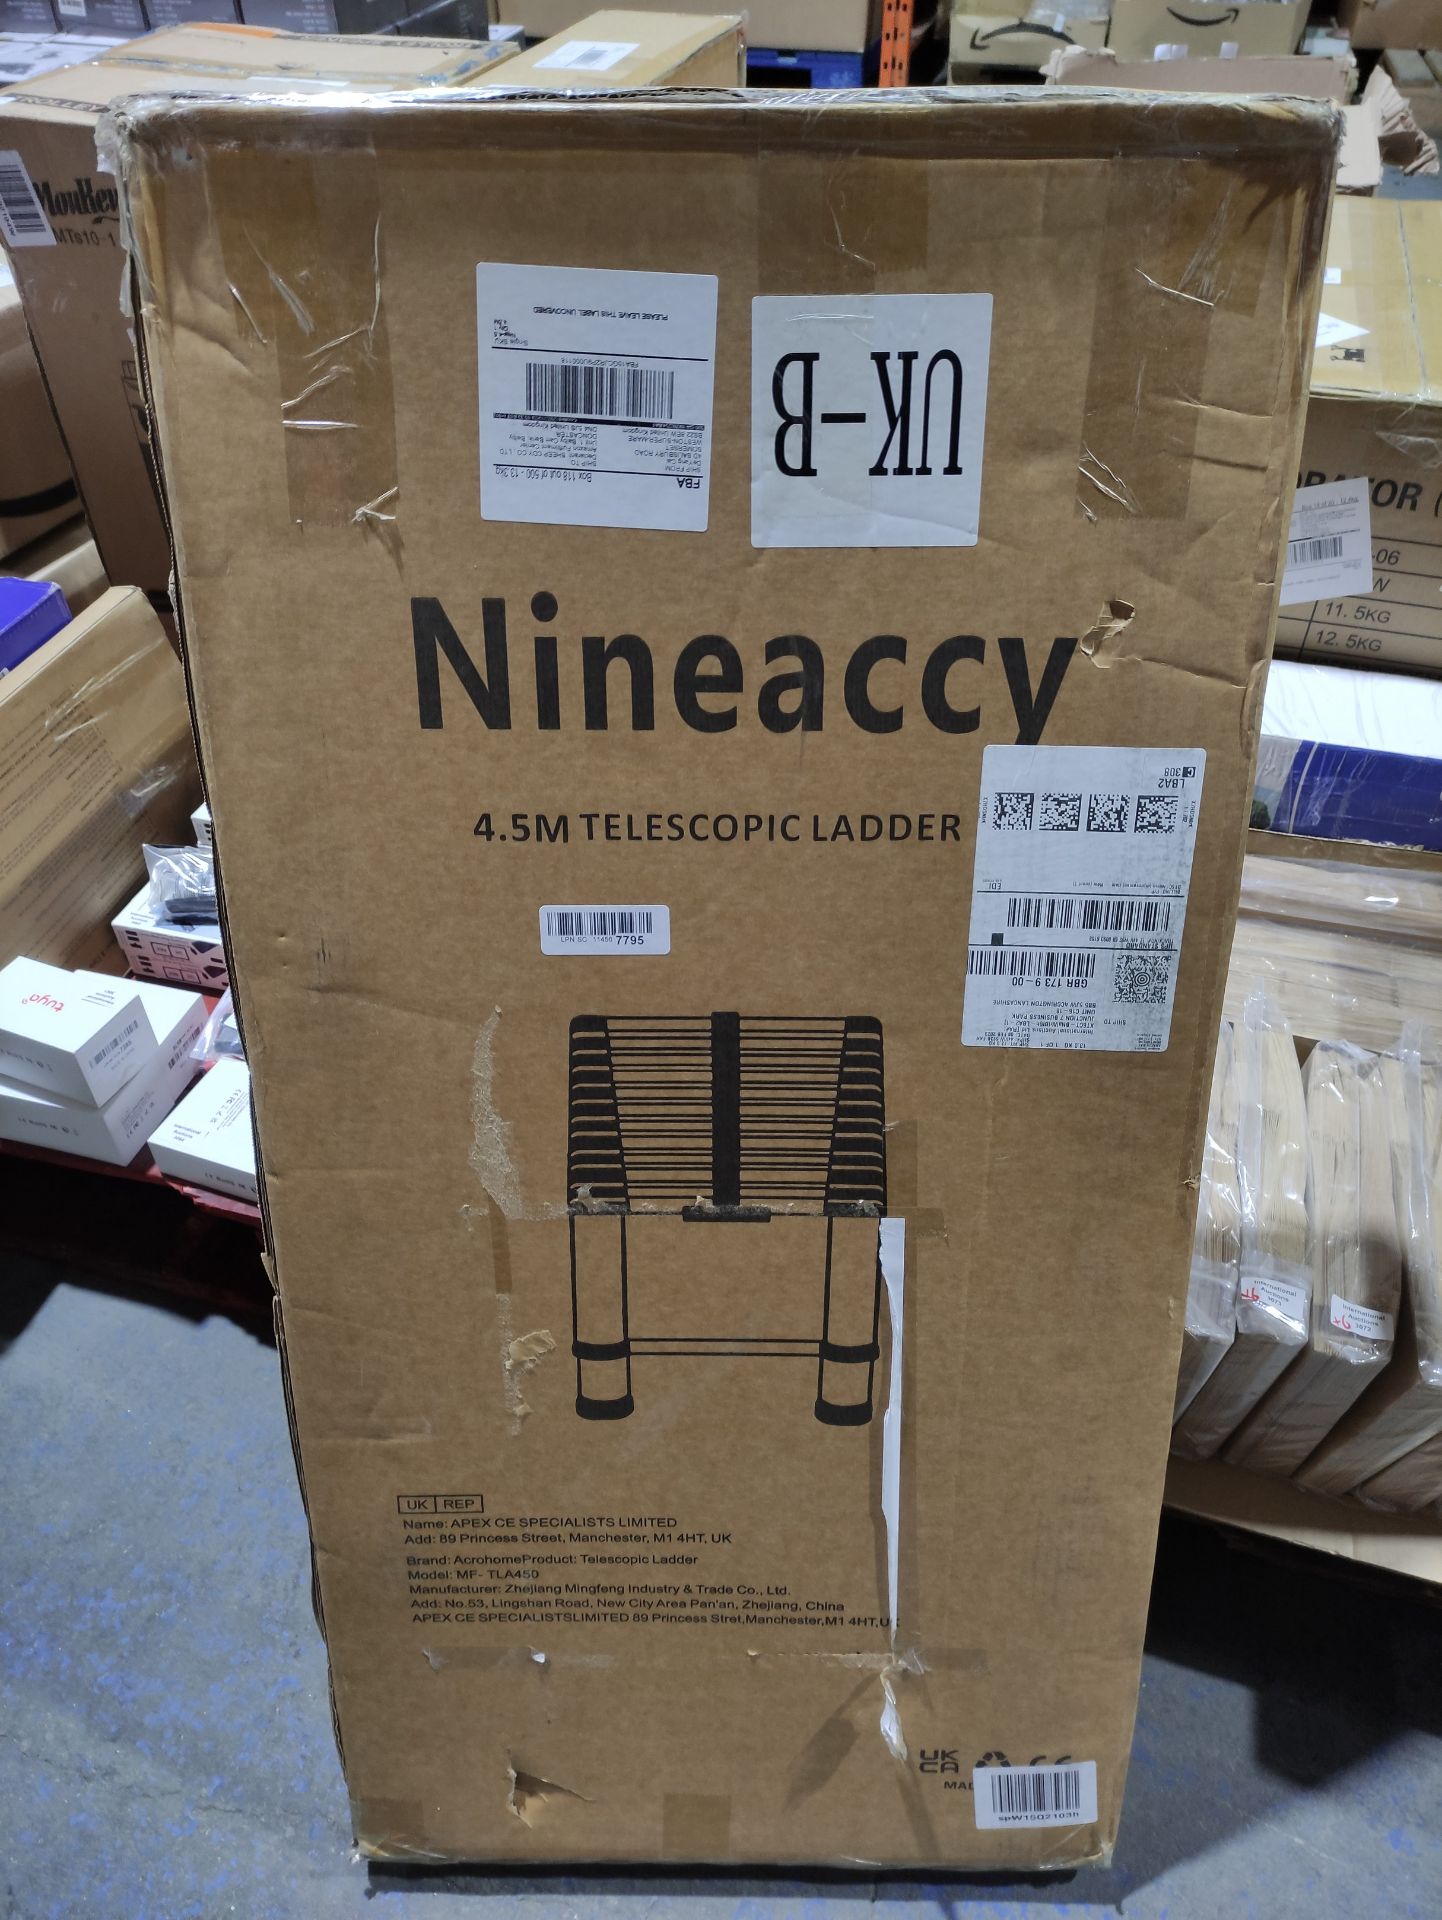 RRP £102.65 Nineaccy Telescopic Ladder 15FT | 4.5M Max Load 330lbs - Image 2 of 2